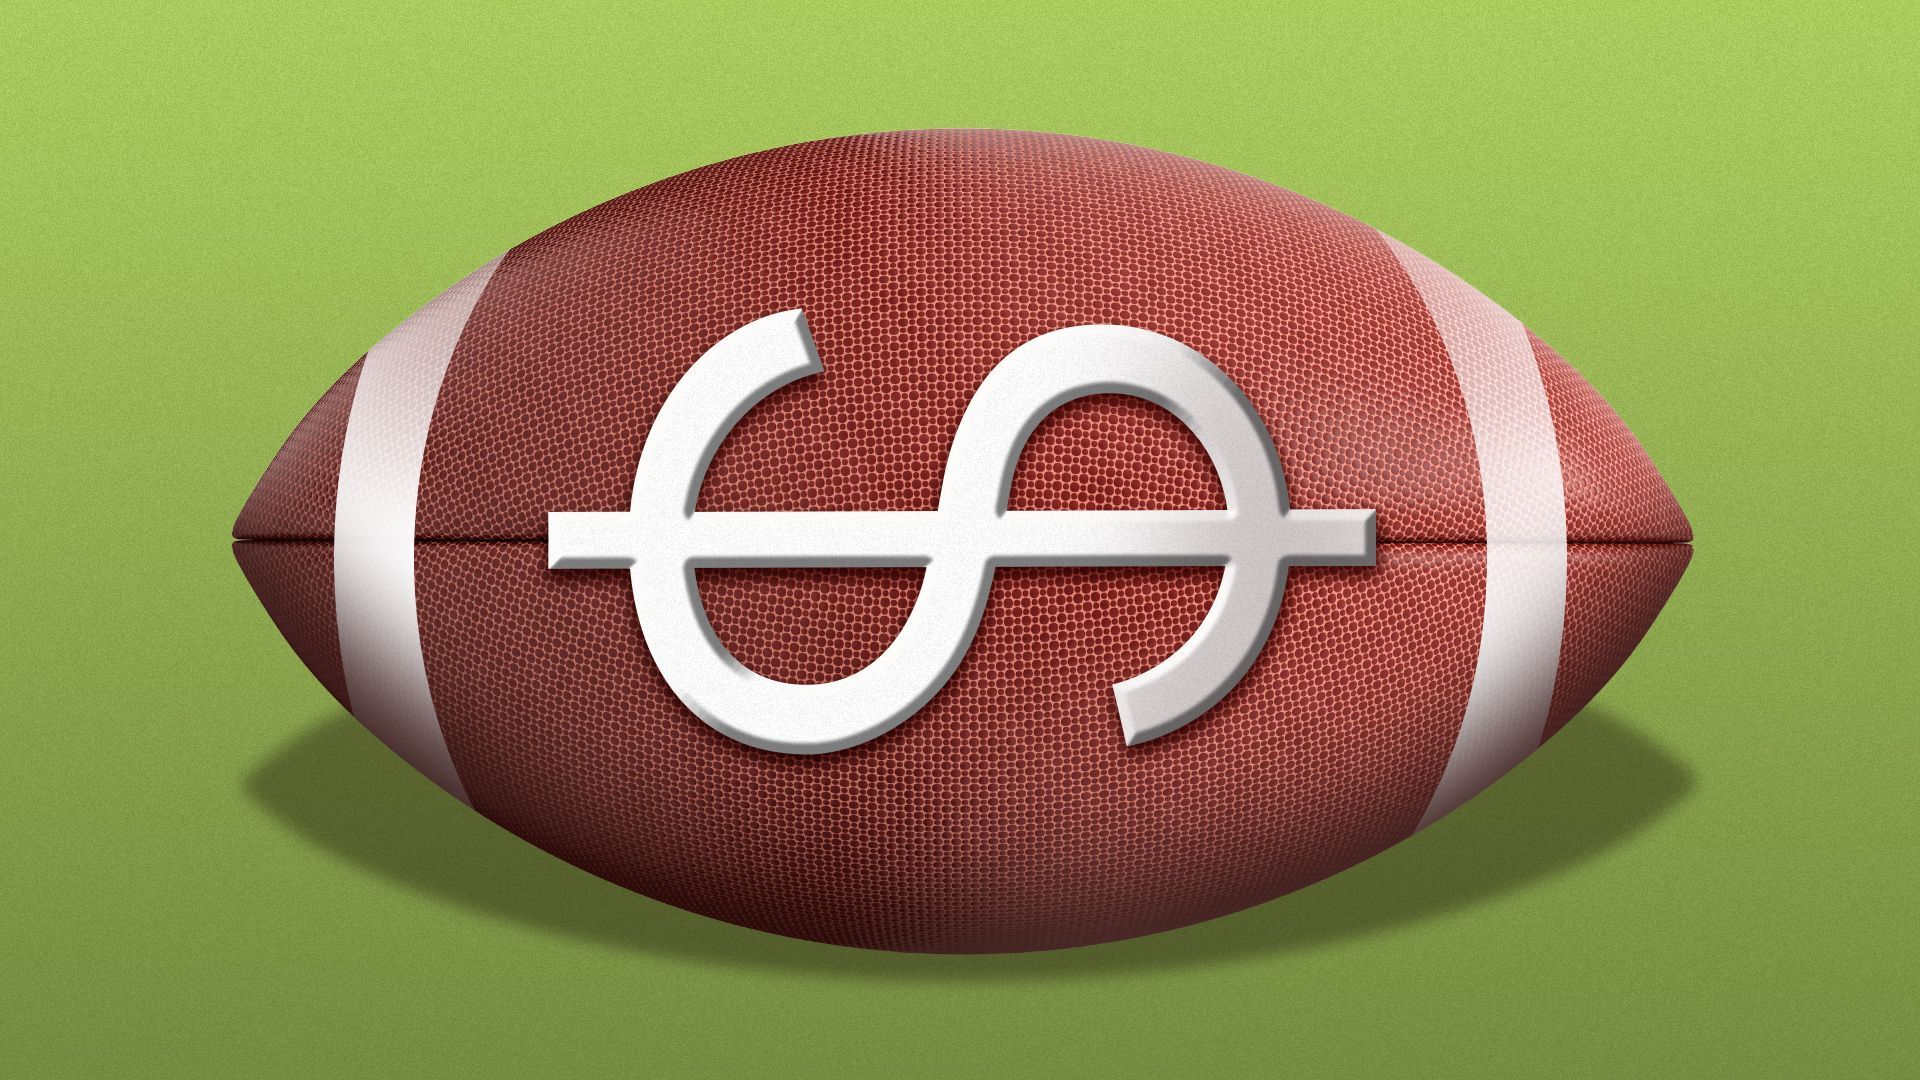 Illustration of a football with a dollar sign for laces